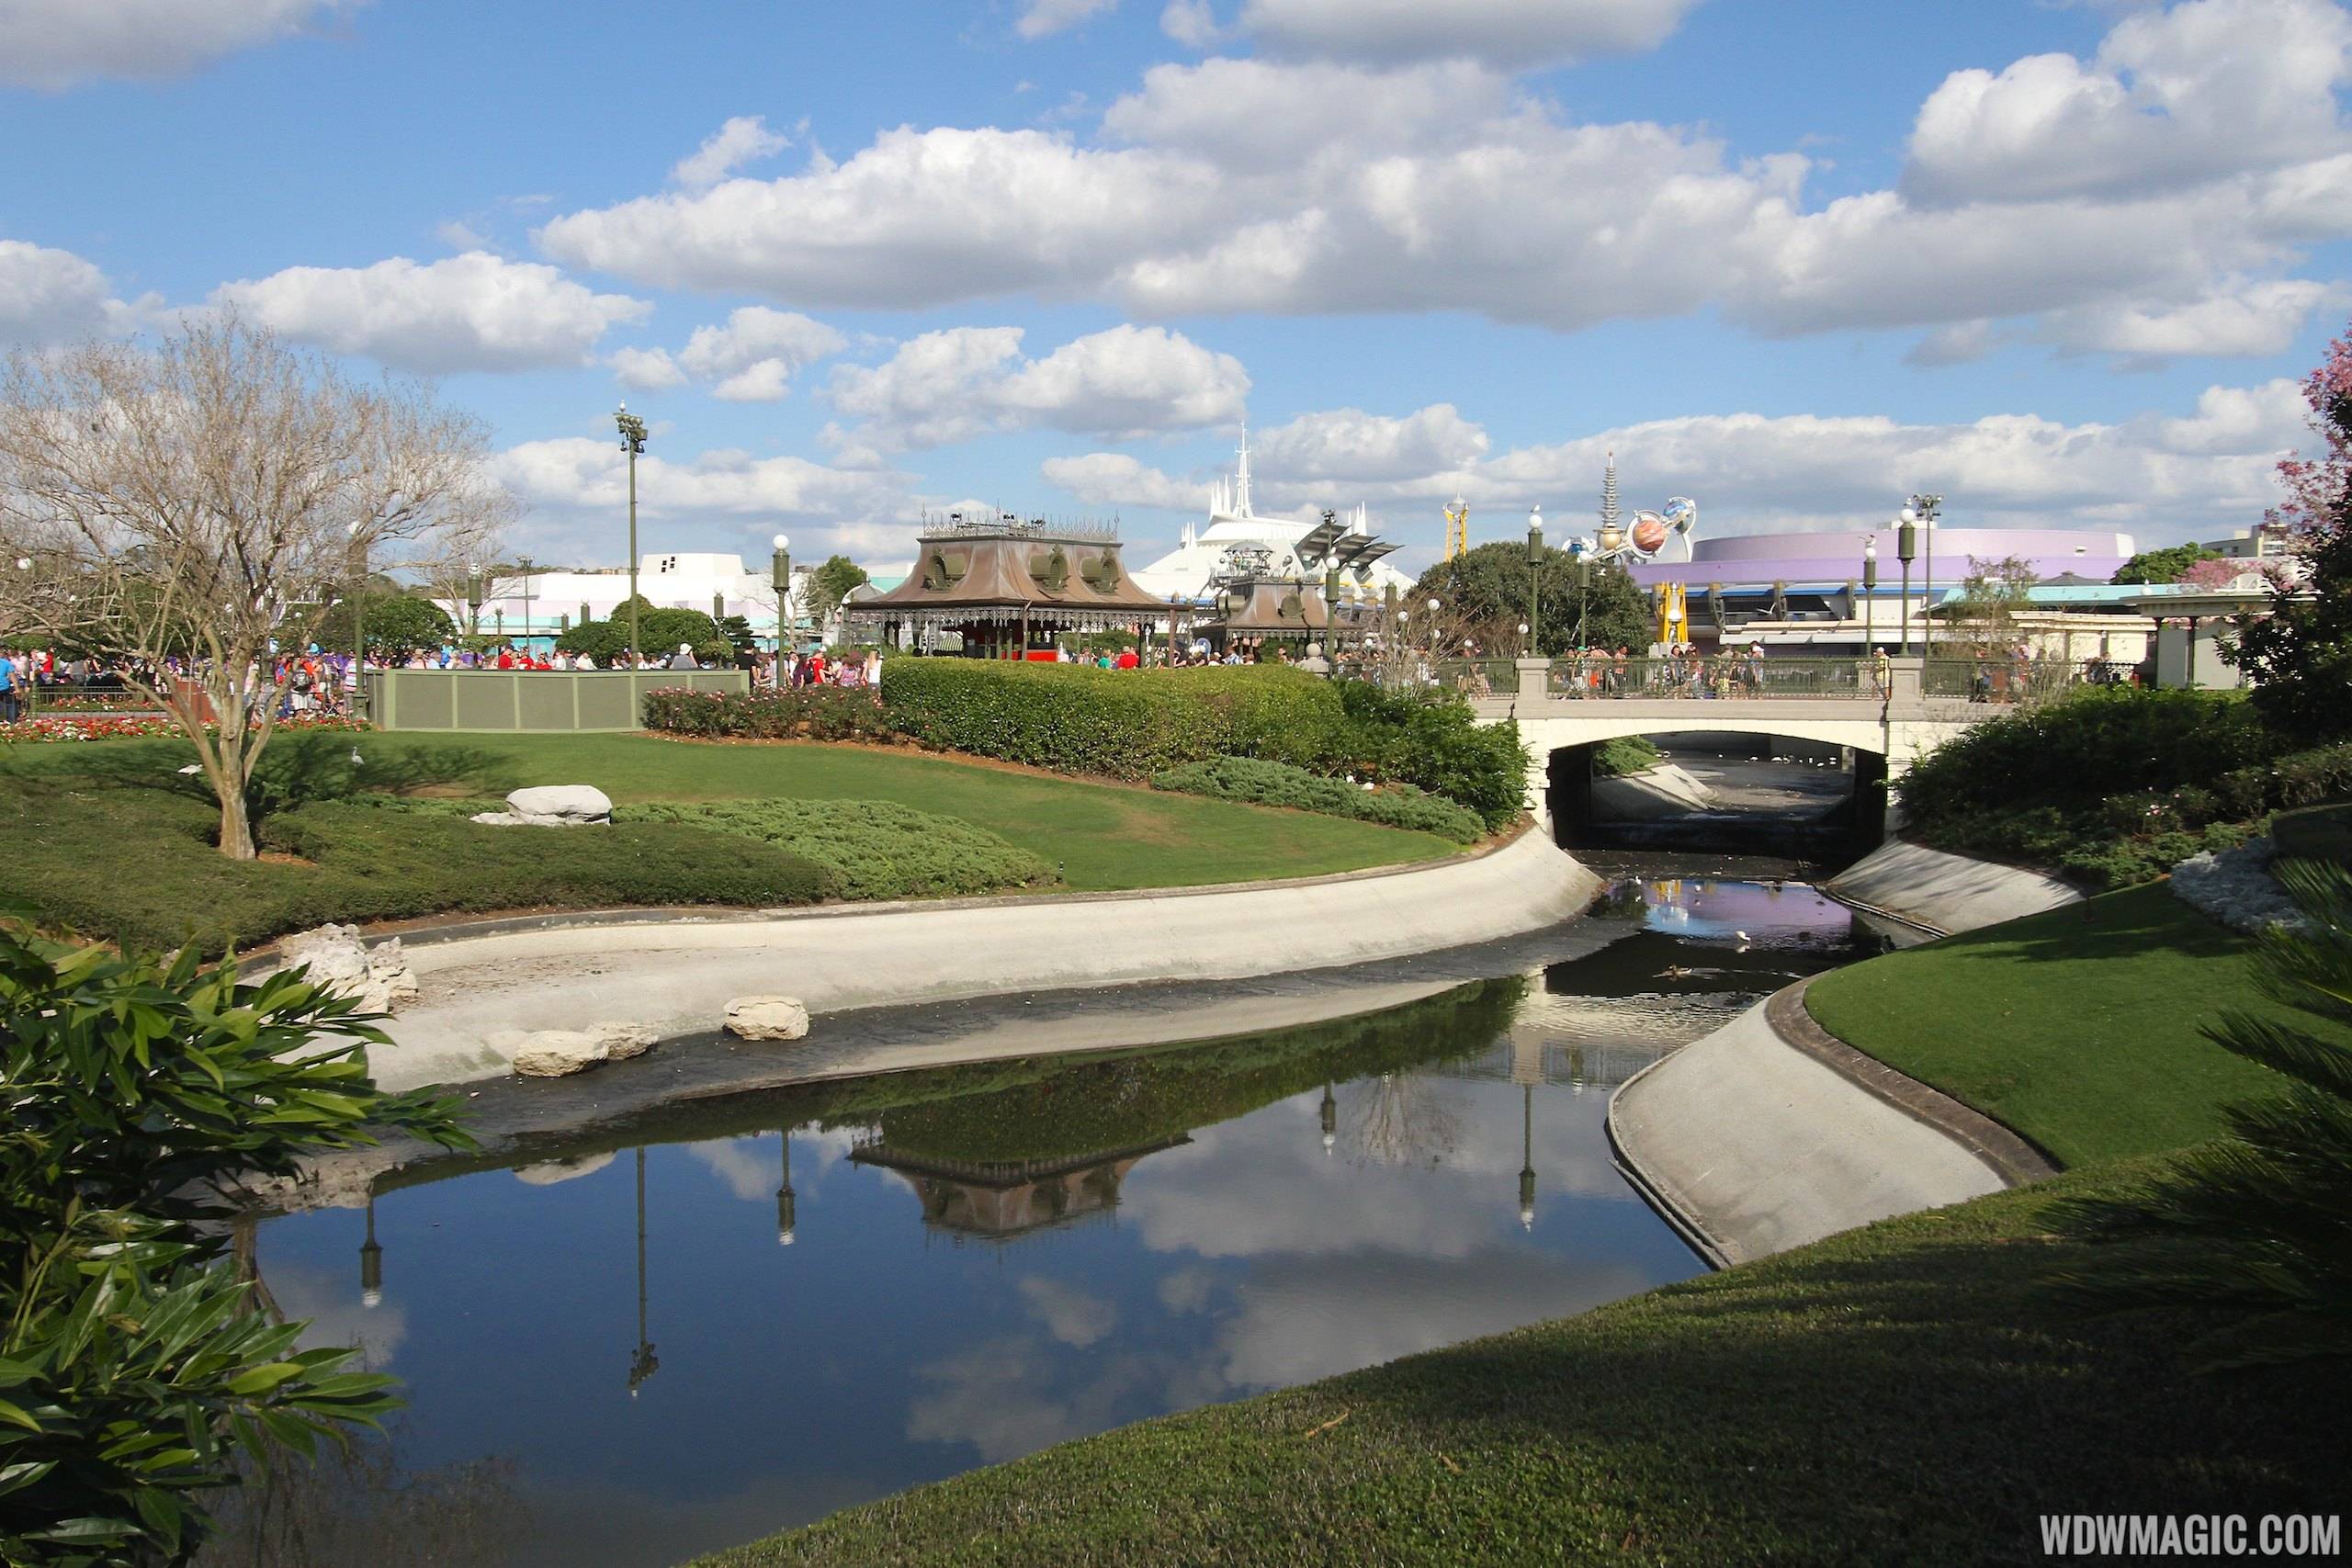 PHOTOS - A look at the moat draining project at the Magic Kingdom